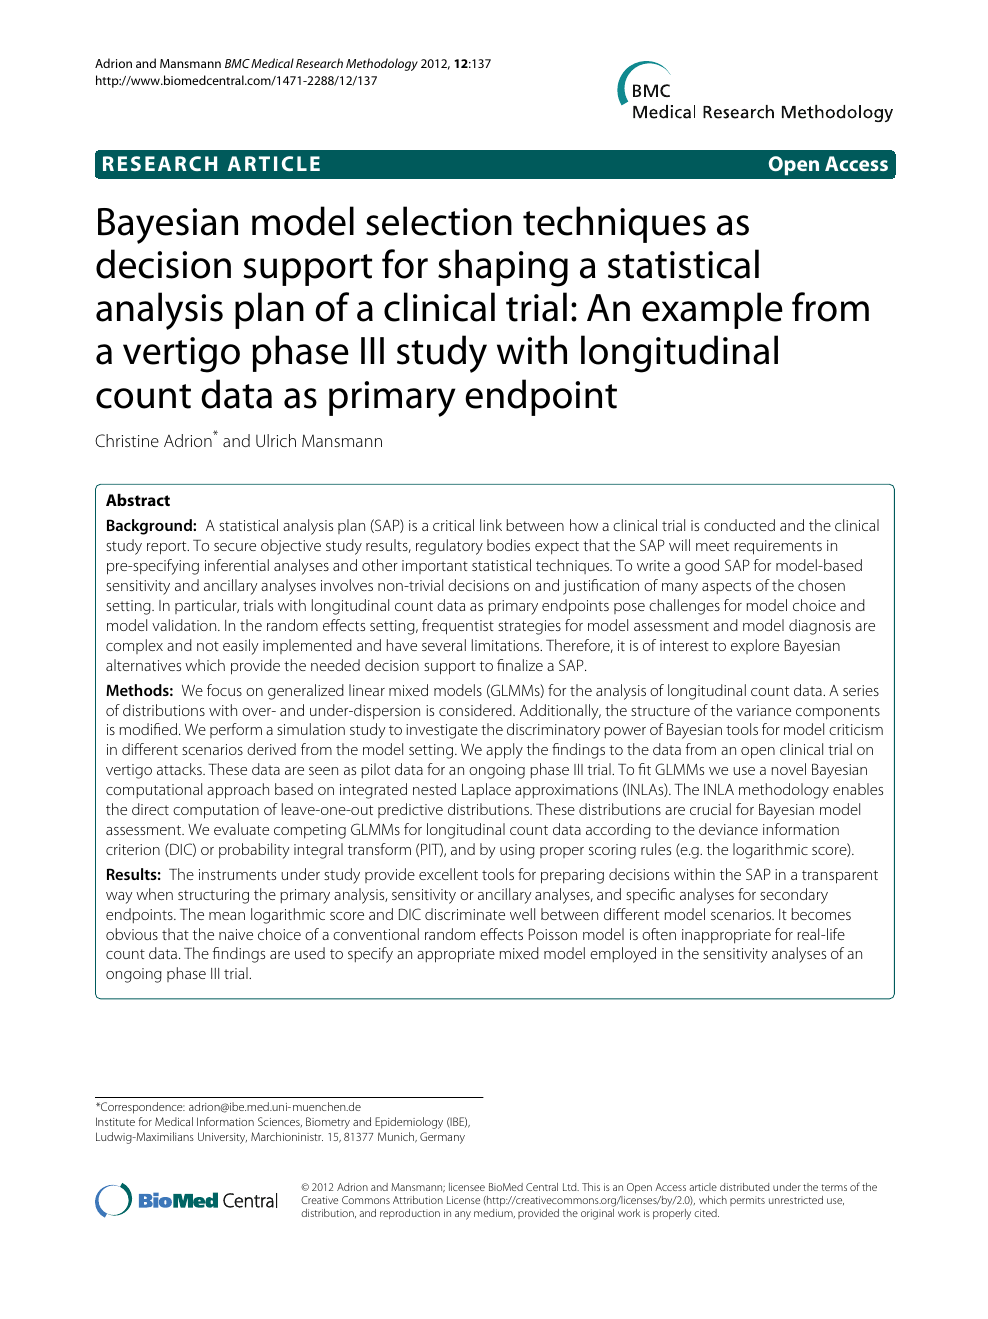 Bayesian model selection techniques as decision support for